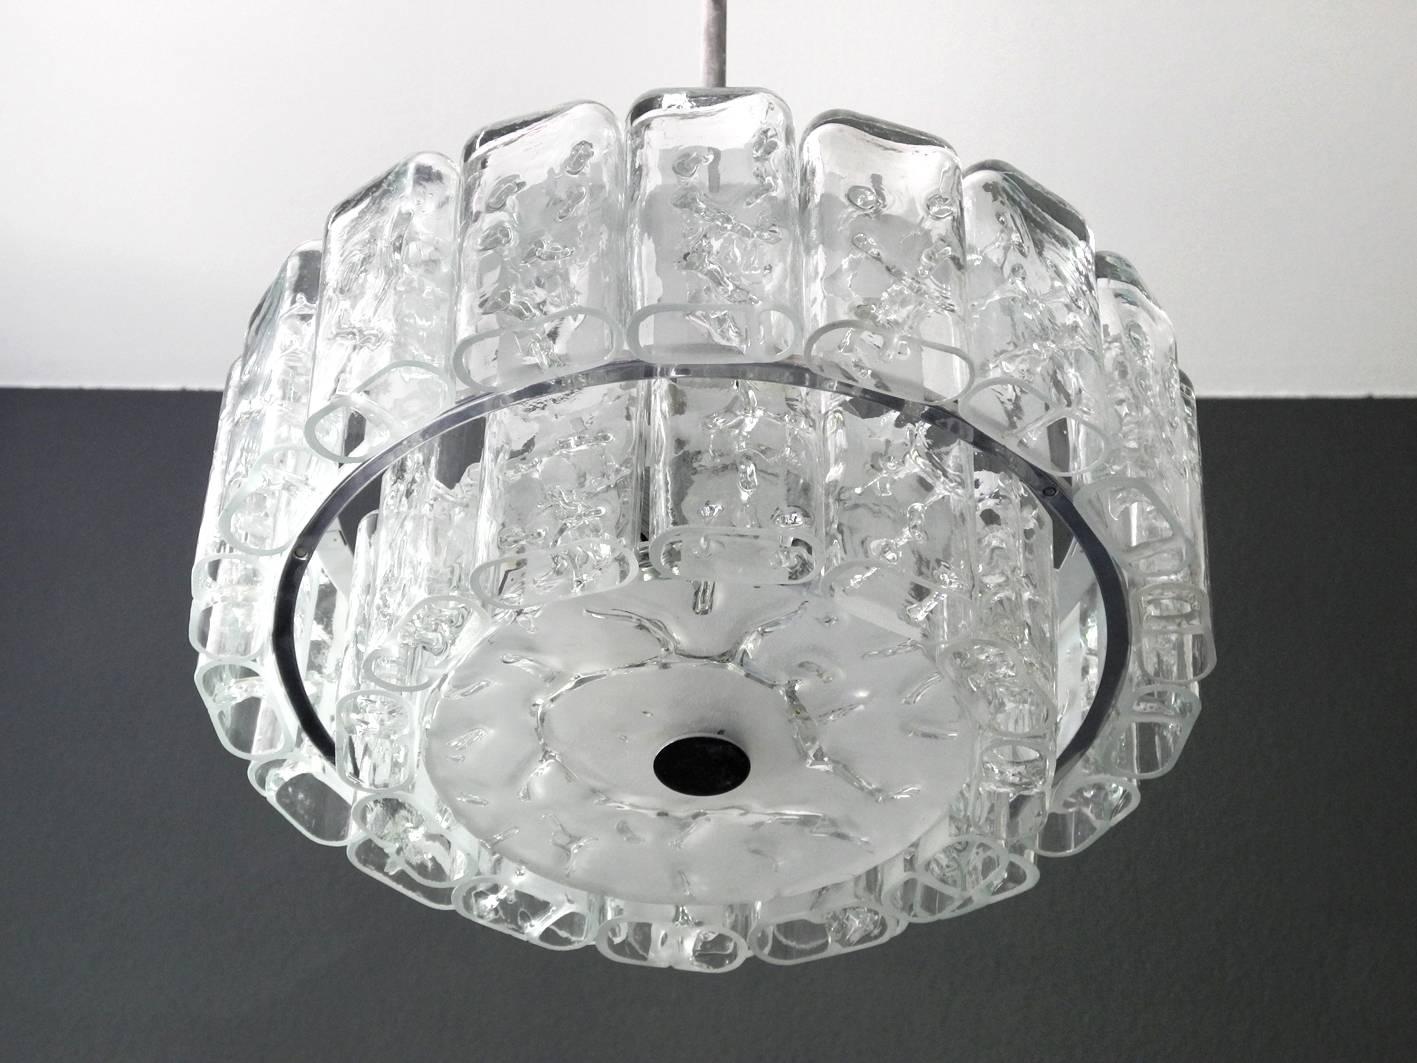 Very imposing beautiful large original Mid-Century Modern crystal glass chandelier. Made by Doria with original label. Two different sized glass stones which are to hung in two rows. With 18 large and 12 small crystal glasses and a large glass pane